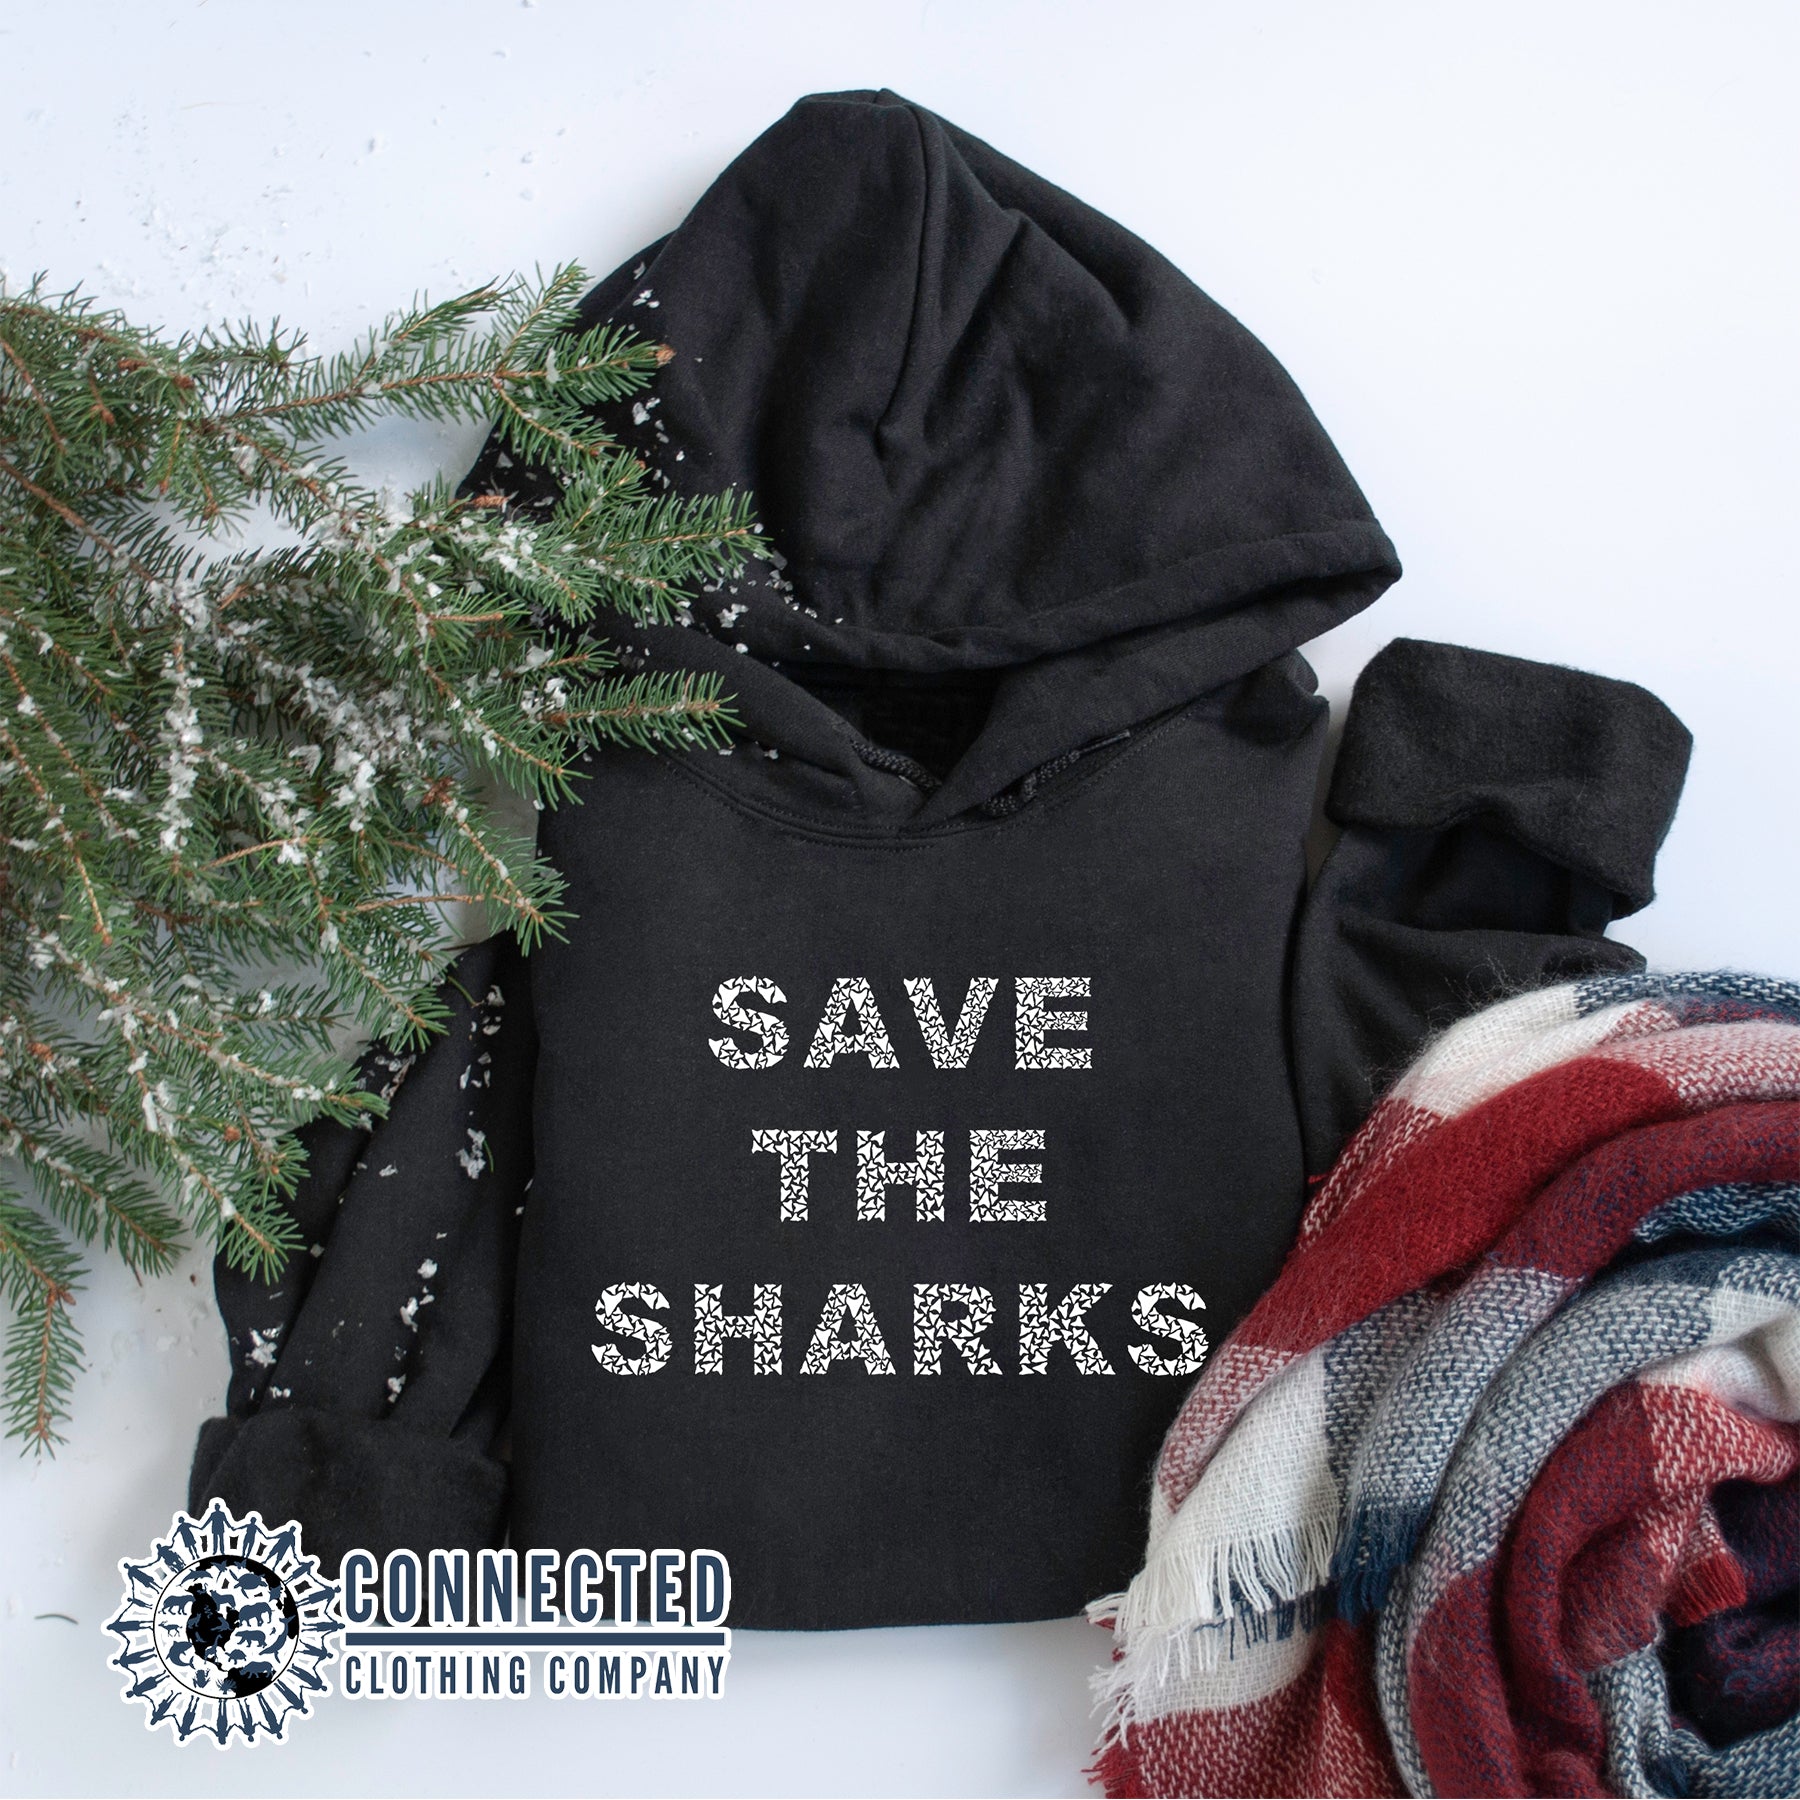 BLACK Save The Sharks Unisex Hoodie - Connected Clothing Company - Ethically and Sustainably Made - 10% donated to Oceana shark conservation